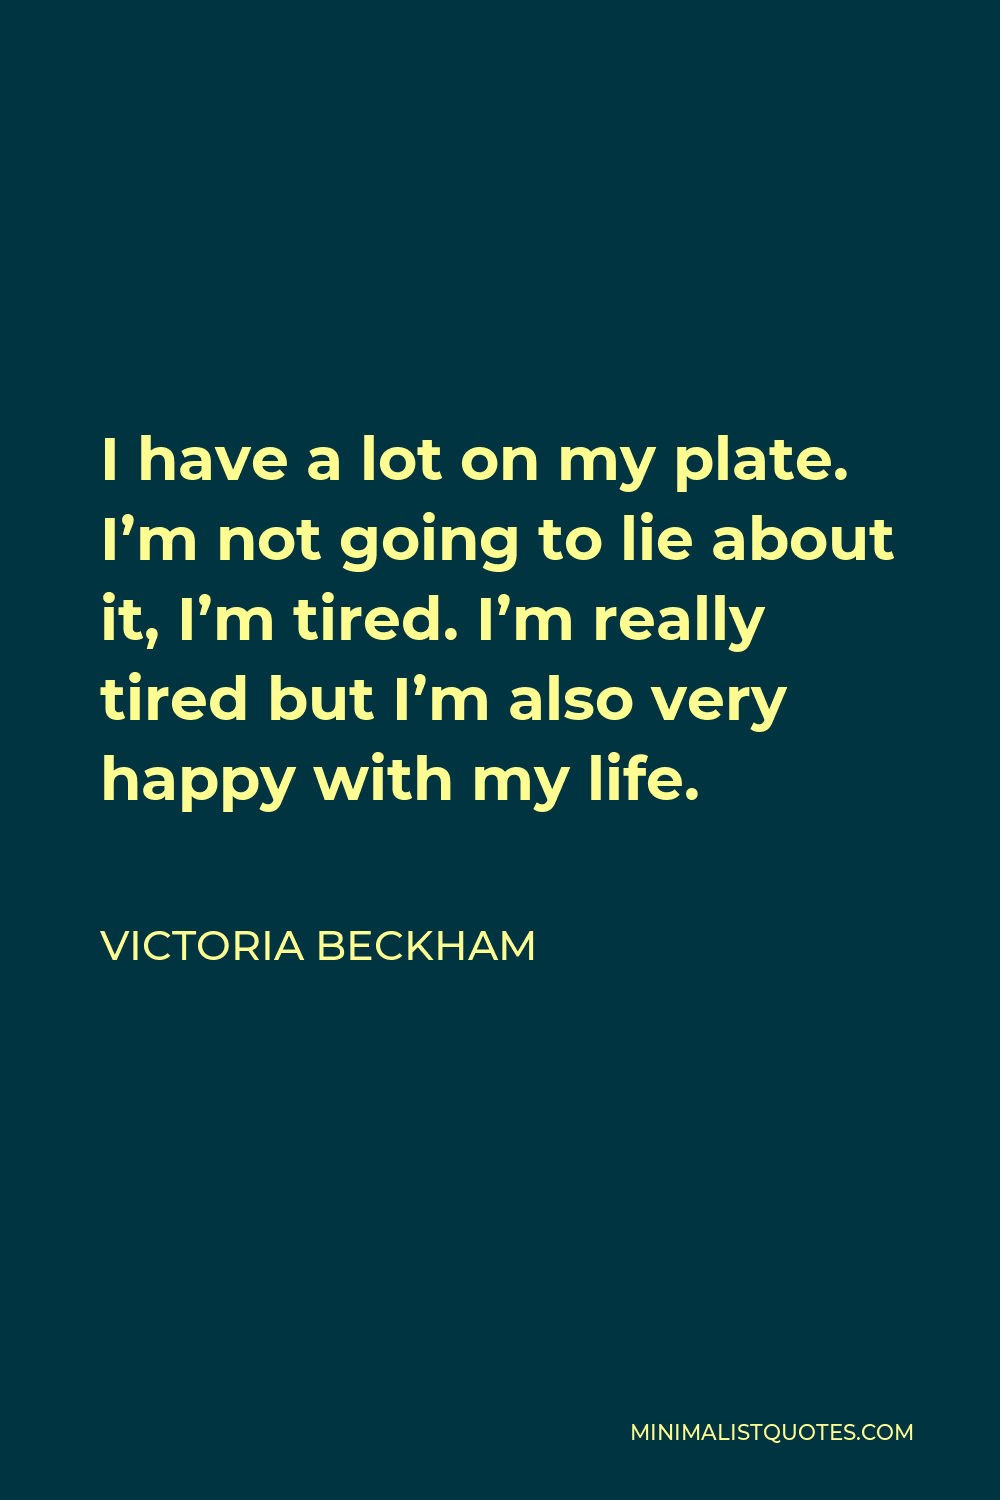 Victoria Beckham Quote - I have a lot on my plate. I’m not going to lie about it, I’m tired. I’m really tired but I’m also very happy with my life.